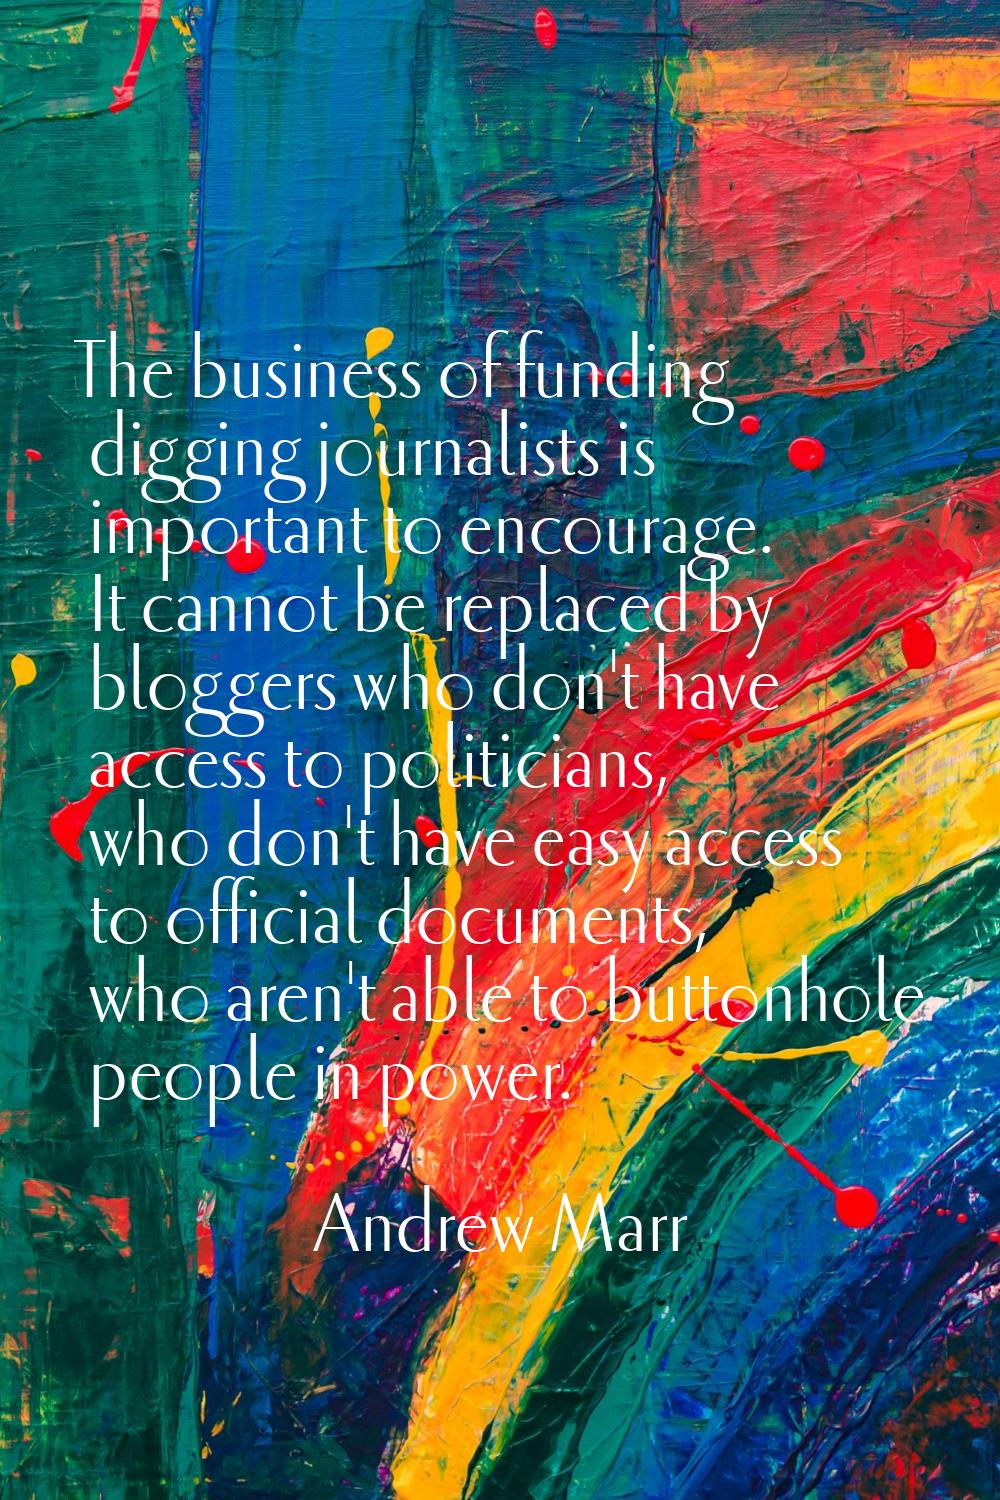 The business of funding digging journalists is important to encourage. It cannot be replaced by blo